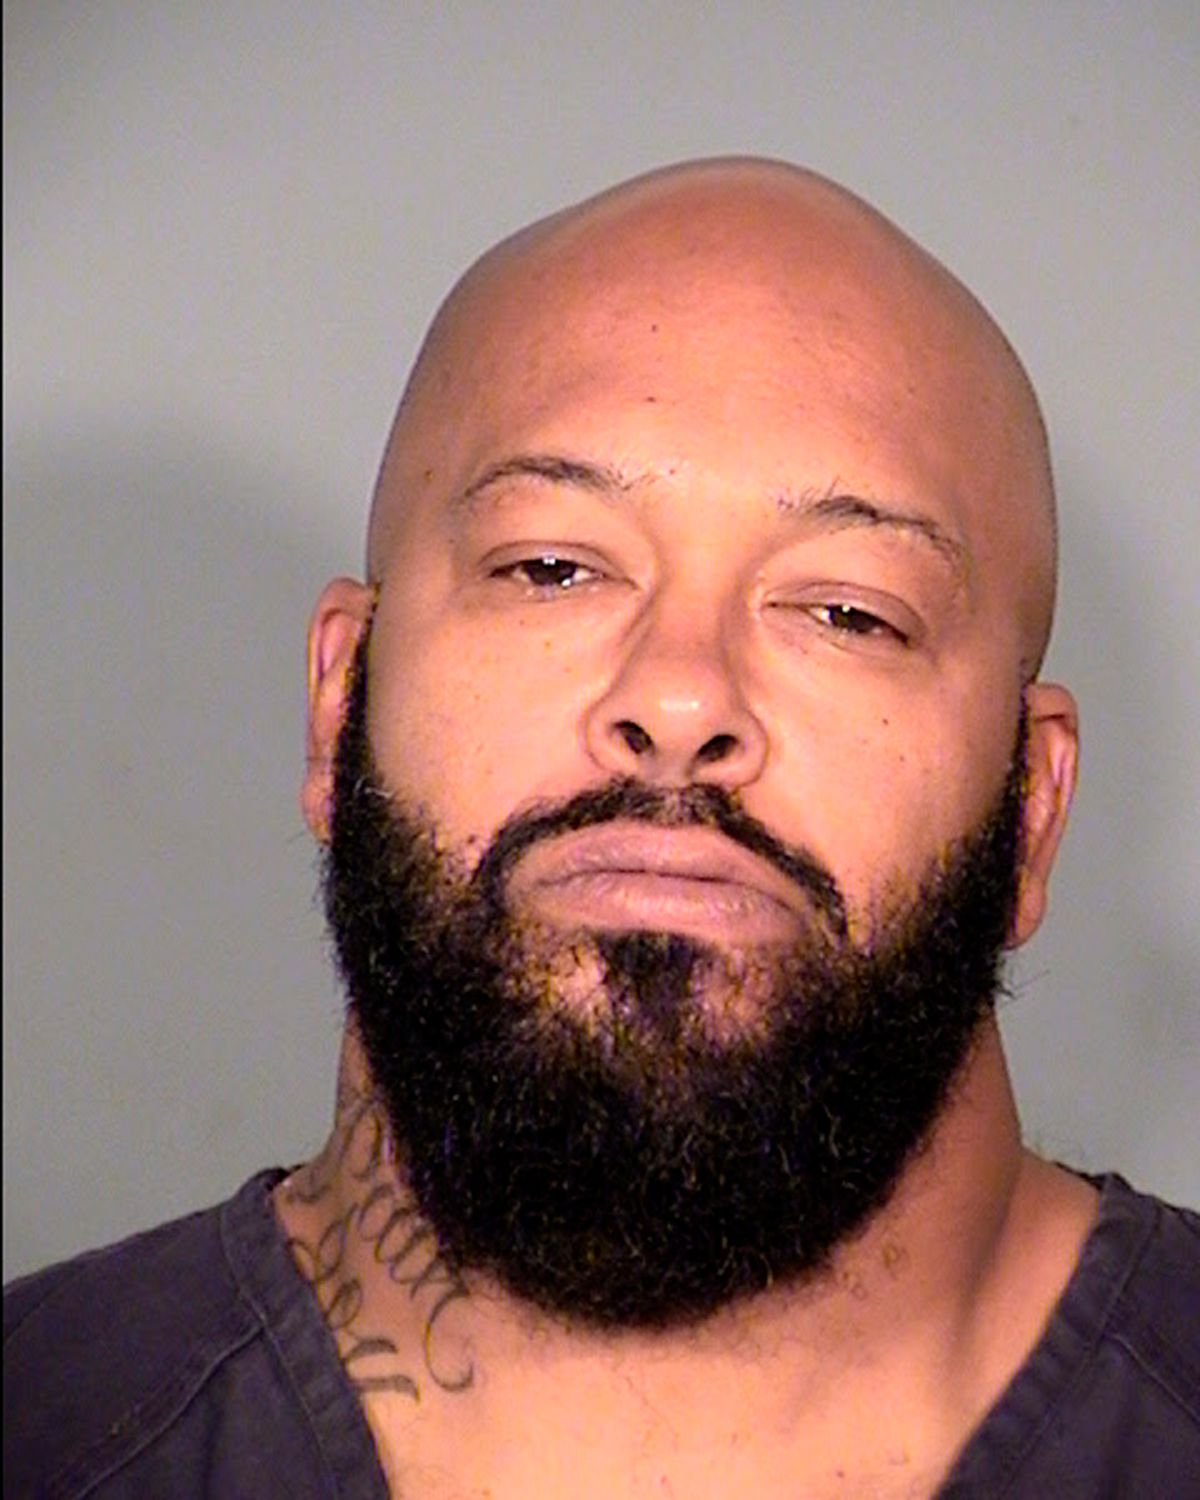 This Oct. 29, 2014 photo provided by the Las Vegas Metropolitan Police Department shows Marion "Suge" Knight.  (AP/Las Vegas Metropolitan Police Department)